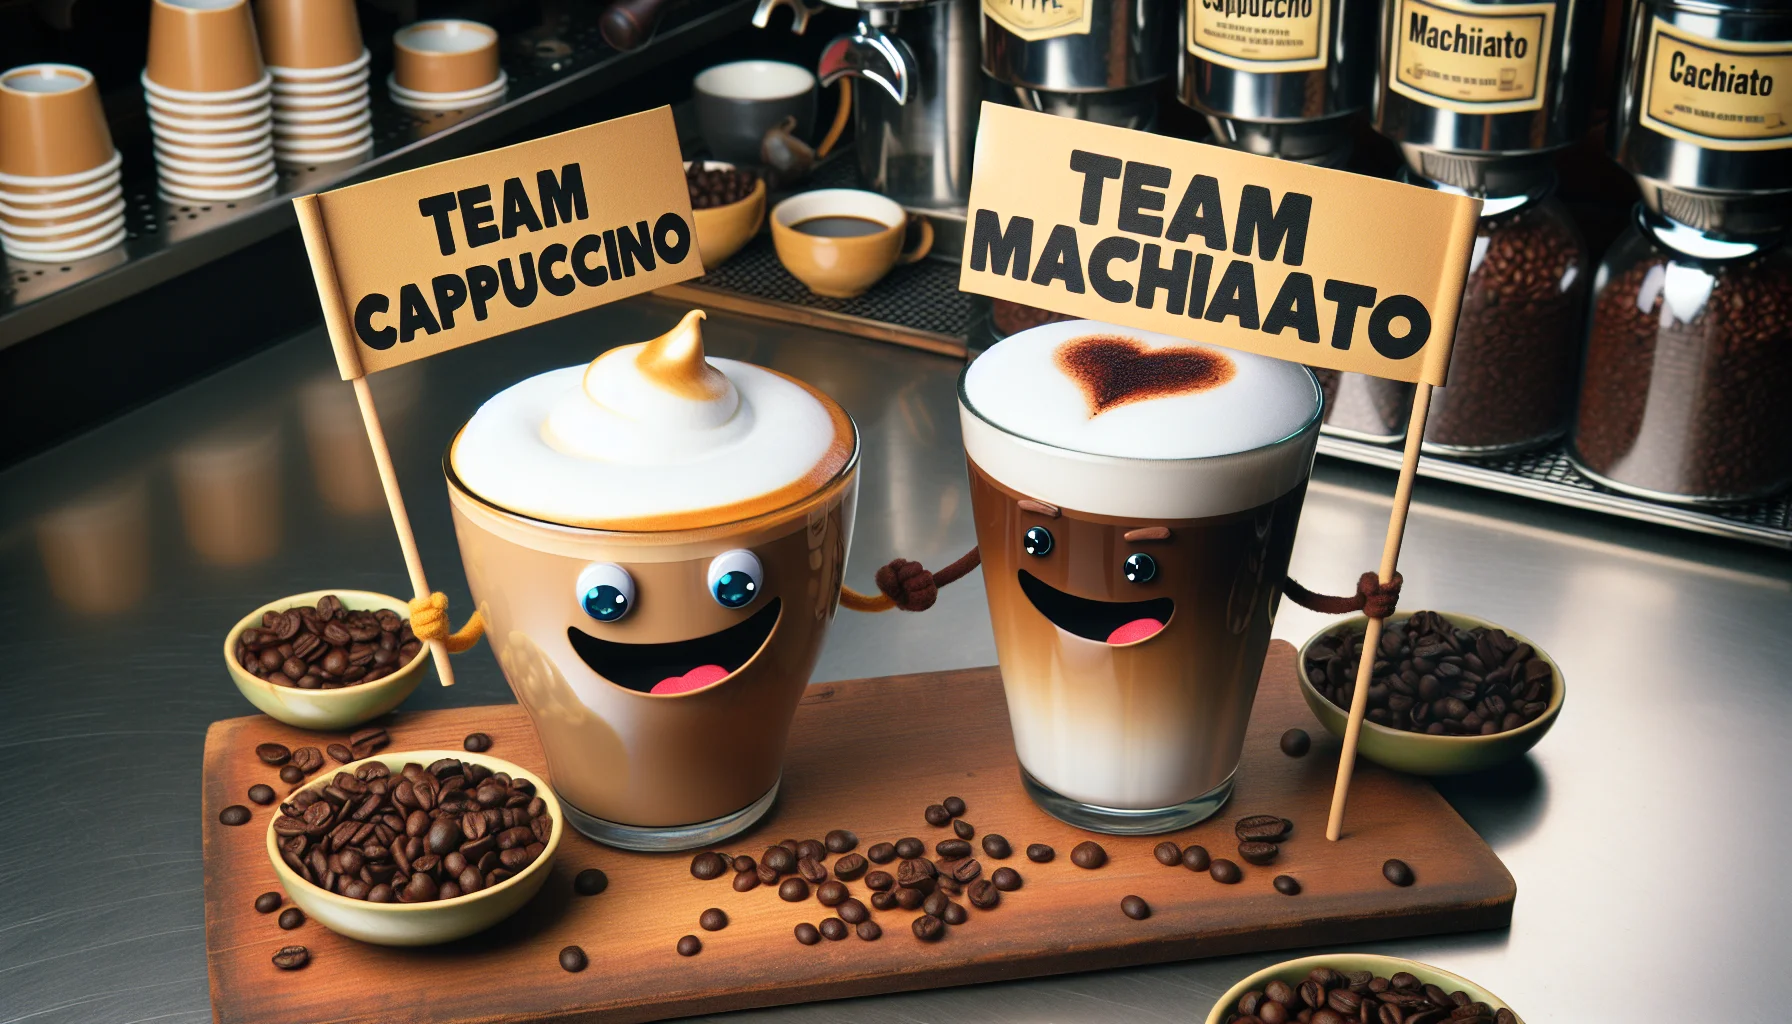 A humorous and realistic depiction of a friendly rivalry between two popular coffee drinks: cappuccino and macchiato. Each drink is anthropomorphized, having cartoon eyes and arms. The cappuccino, a taller frothy drink with a broad smile, is holding a banner that reads 'Team Cappuccino'. On the other hand, the macchiato, a smaller strong drink, holds a banner reading 'Team Macchiato'. They are standing on a coffee shop counter surrounded by coffee beans, a barista's tools and cups, encouraging people to choose their side in this friendly coffee competition.